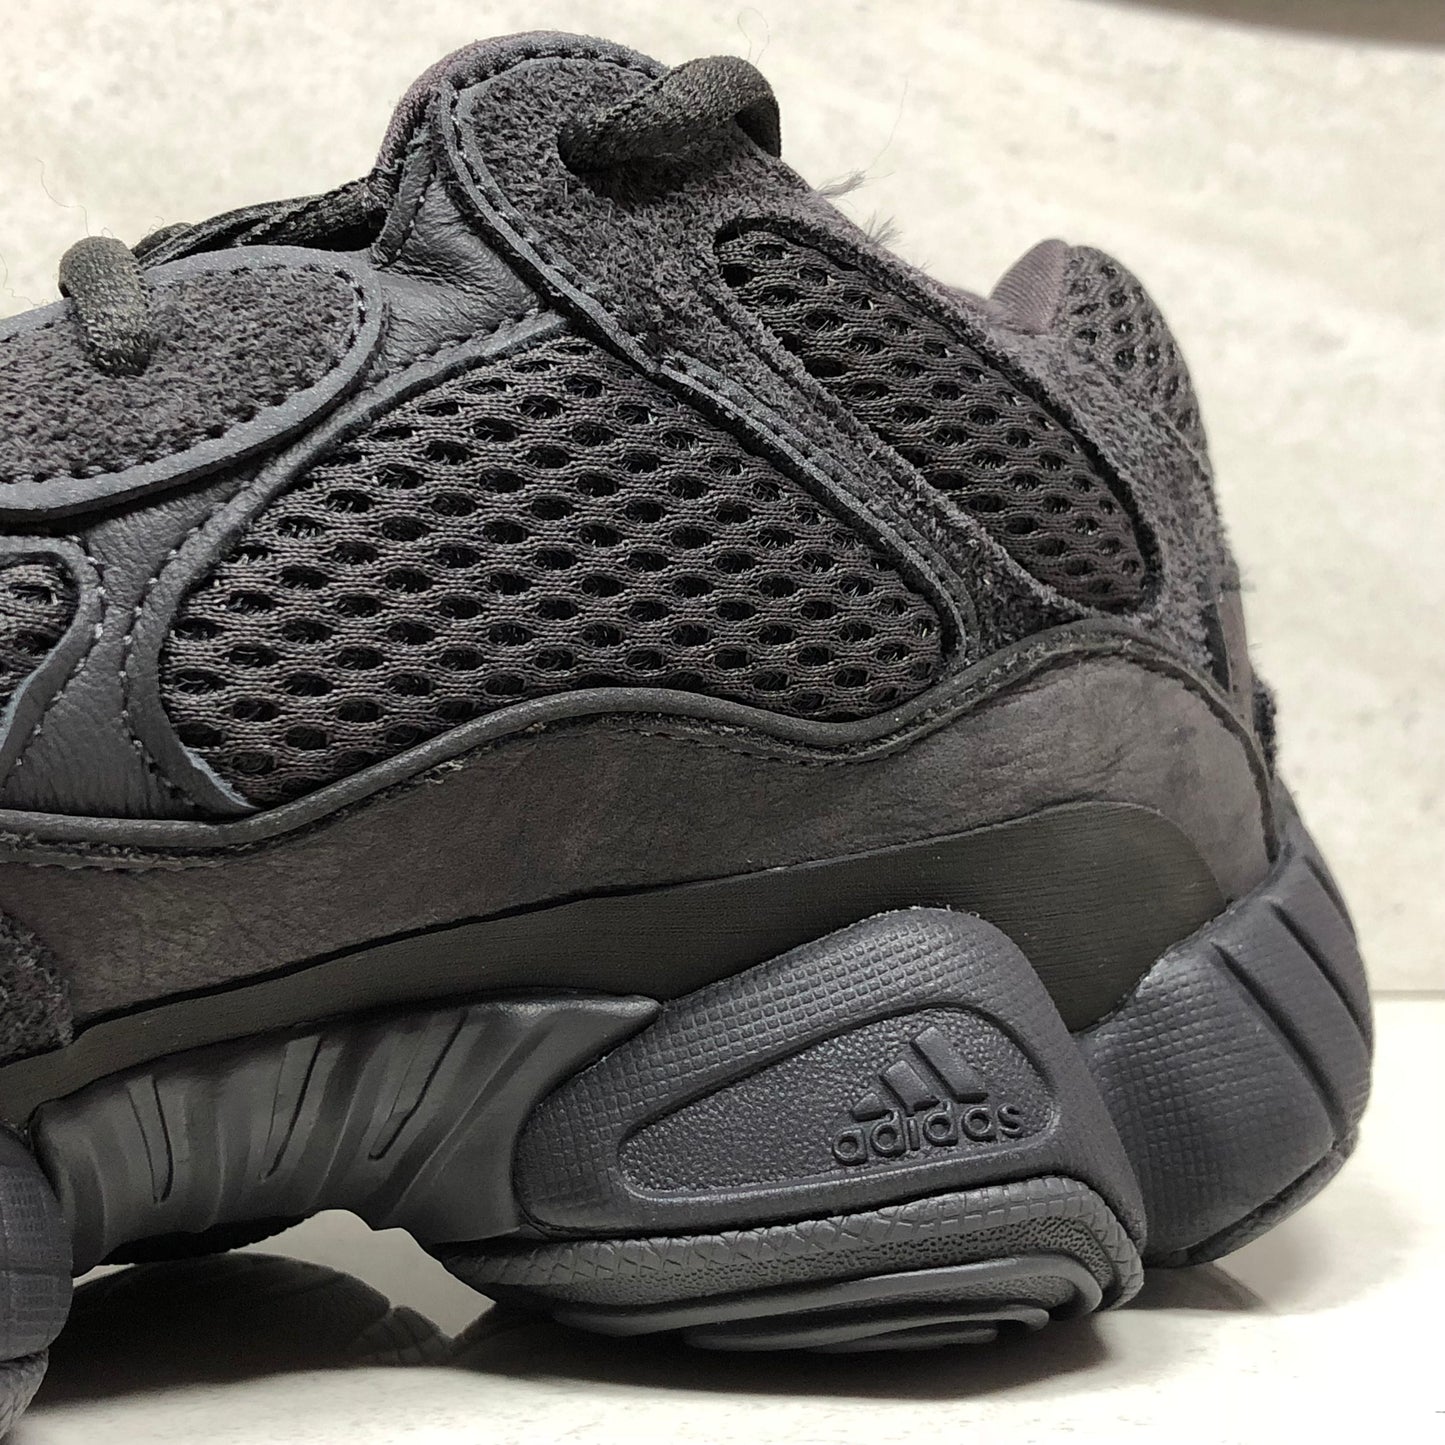 Adidas Yeezy 500 Utility Noir Taille 5/Taille 6.5 F36640